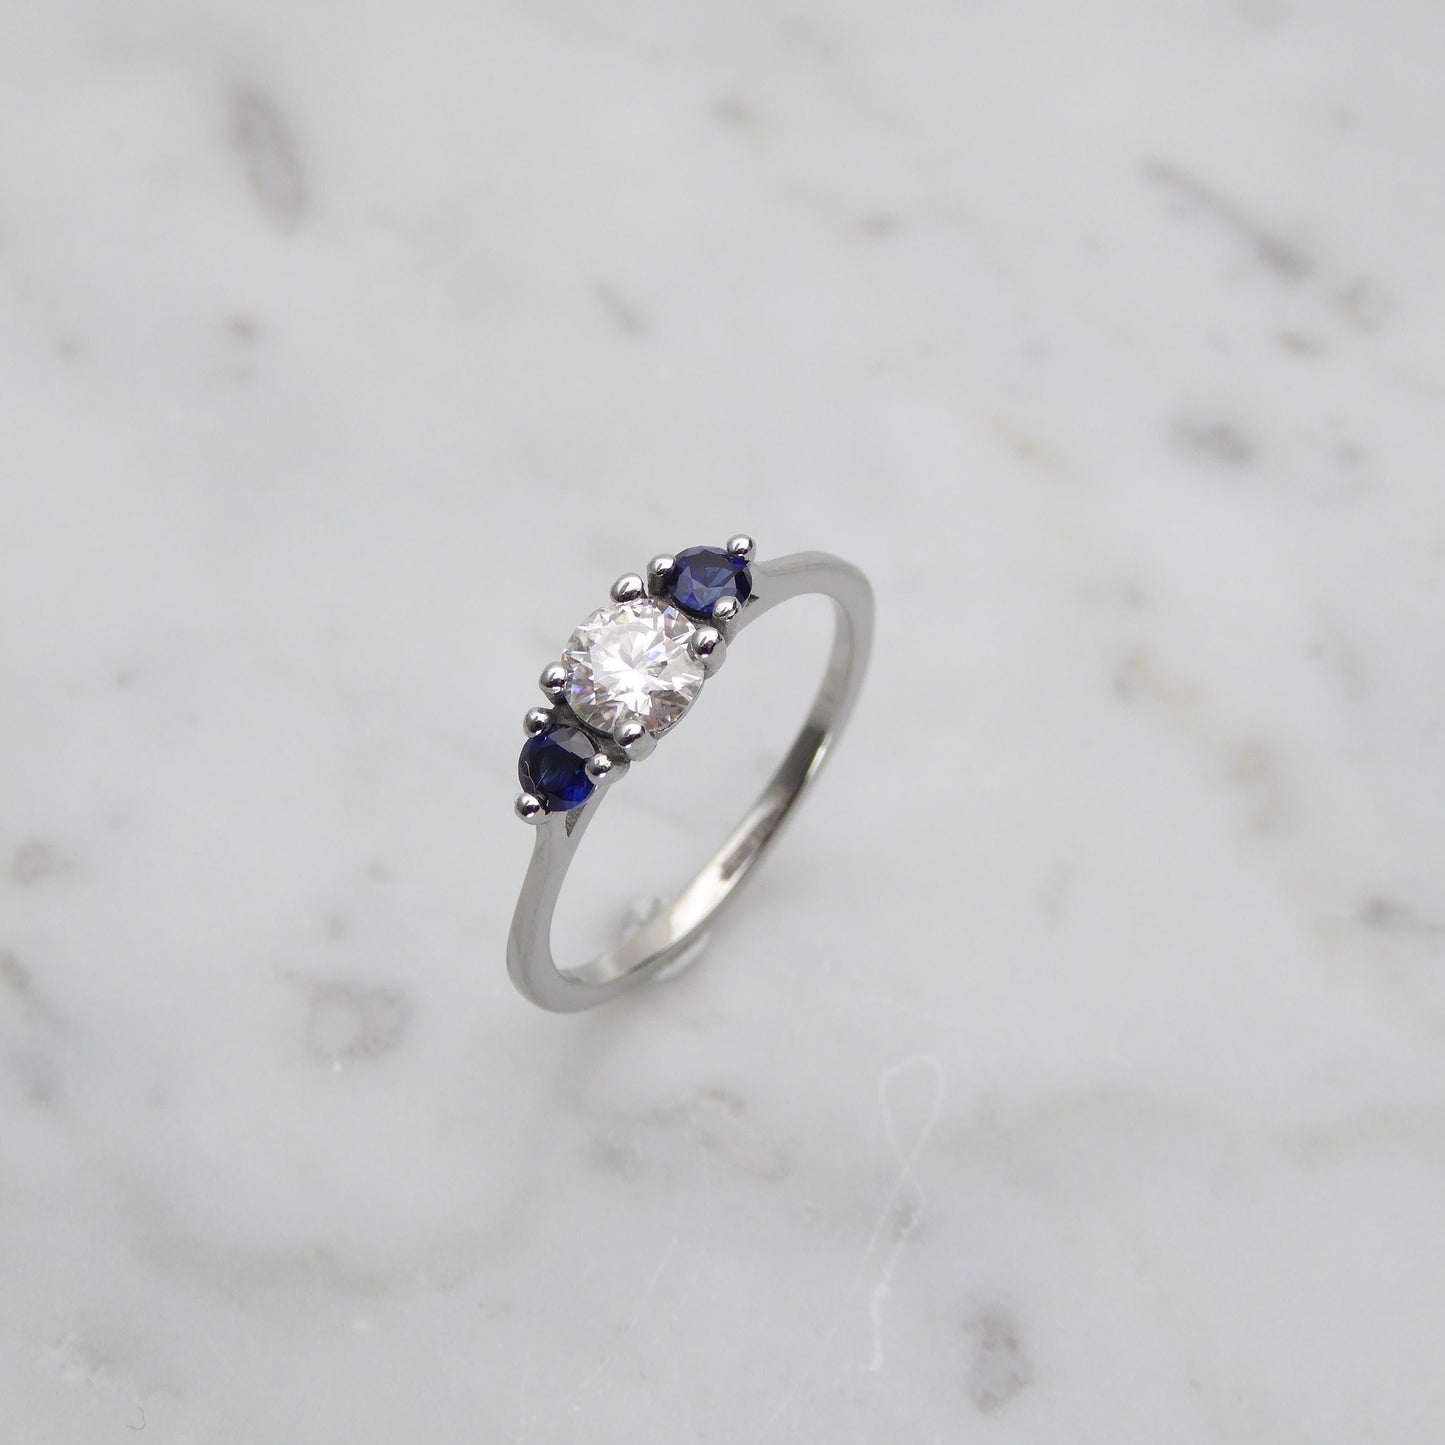 Moissanite & Natural Blue Sapphire 3 stone Trilogy Ring in White Gold or Titanium  -  engagement ring - handmade ring